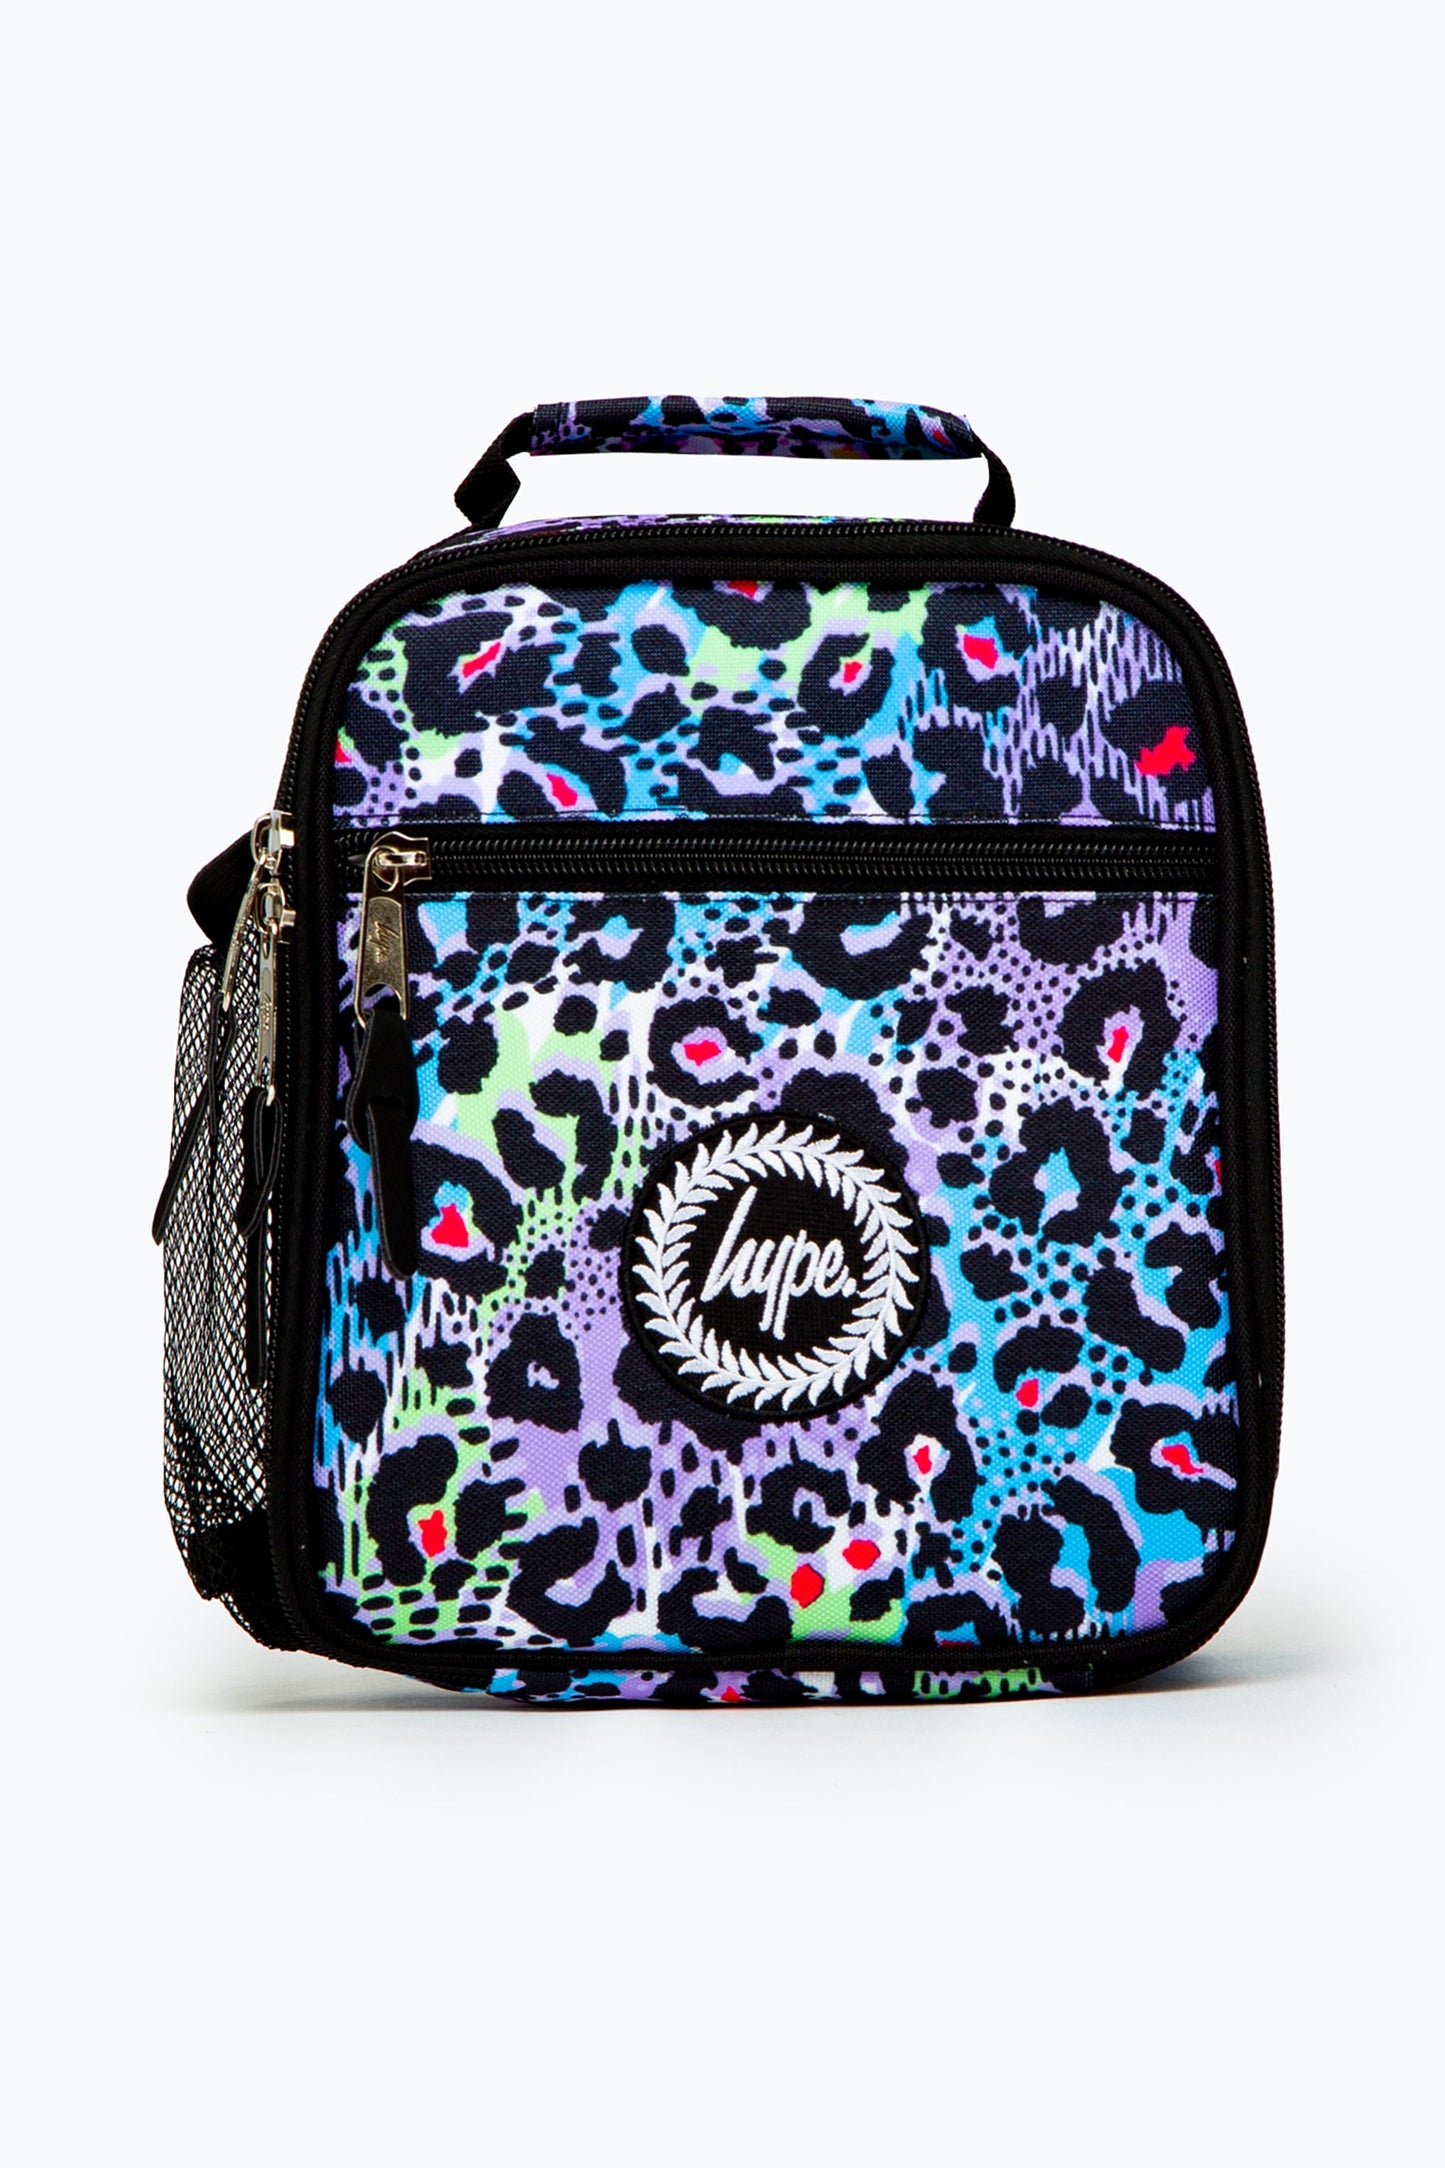 HYPE CRAZY LEOPARD LUNCH BOX